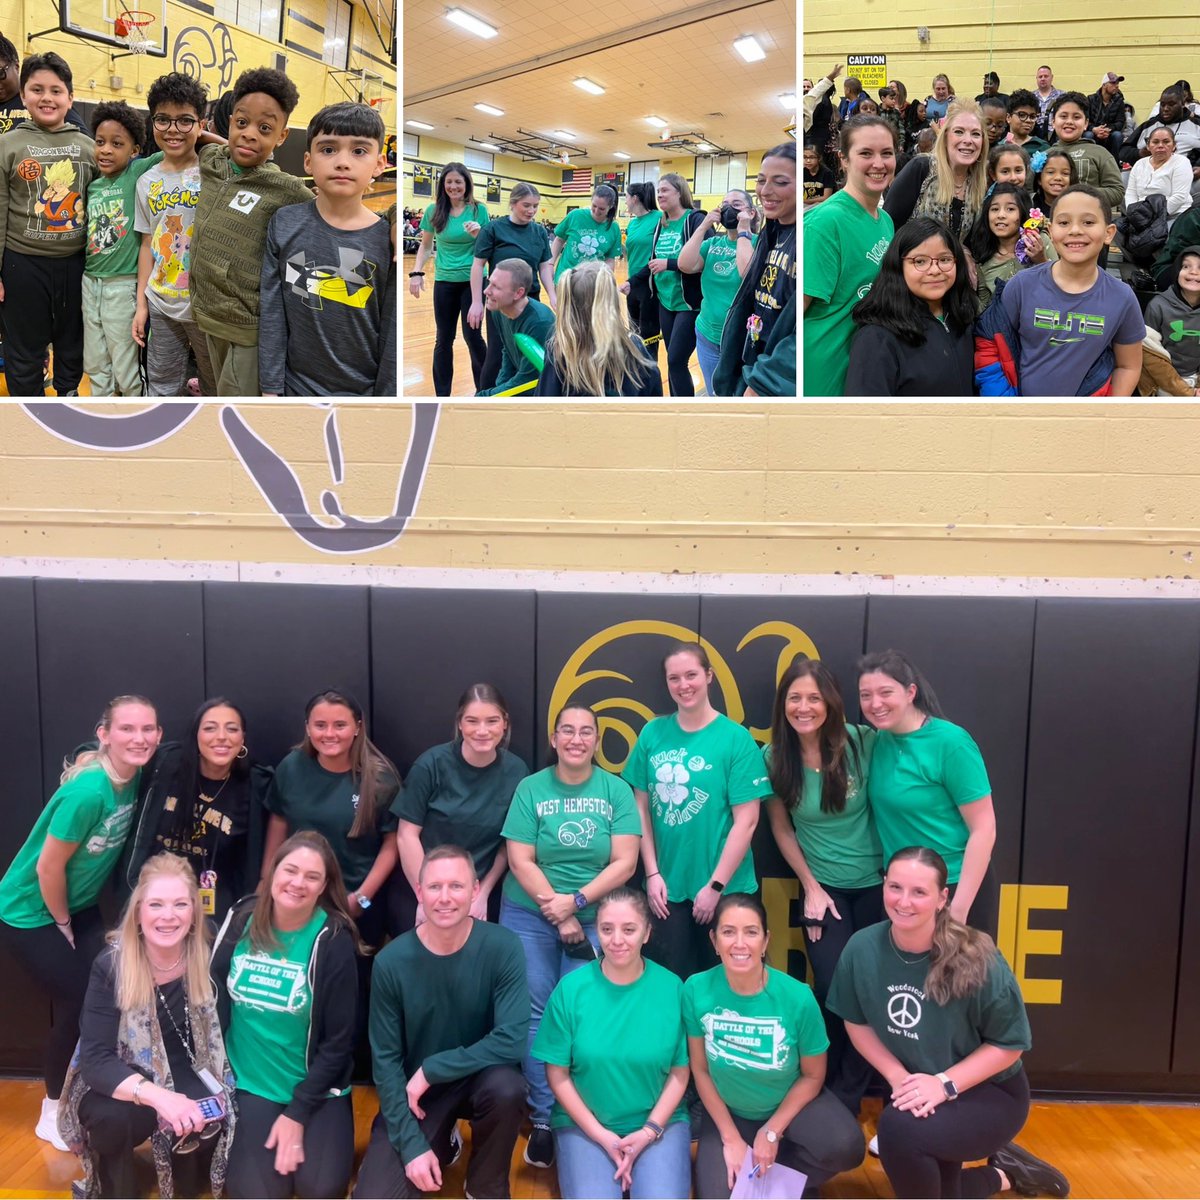 Once again #WHe had an incredible time at WHEA’s BATTLE OF THE SCHOOLS fundraiser supporting WH Senior Class Scholarships. There’s nothing that can compare to this level of COMMUNITY INVOLVEMENT! LET’S GO RAMS! @WhufsdRams @stellina8203 @CornwellAveES @MsGiovanelli @msfine_10